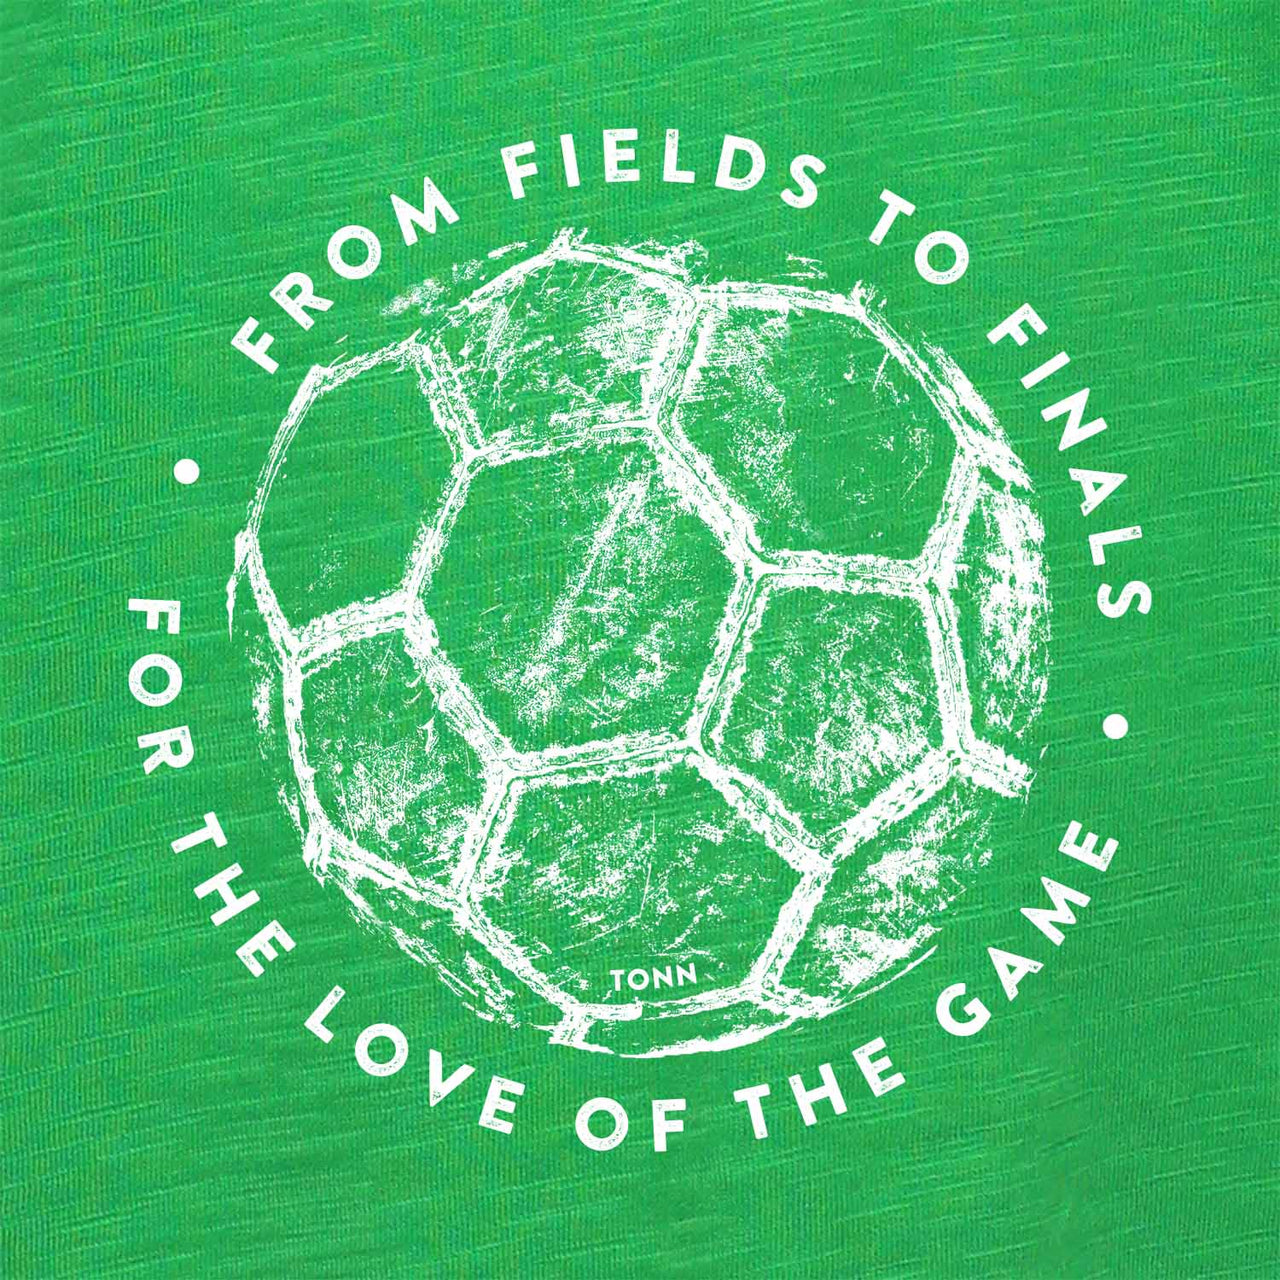 FOOTBALL TEE - FOR LOVE OF THE GAME!